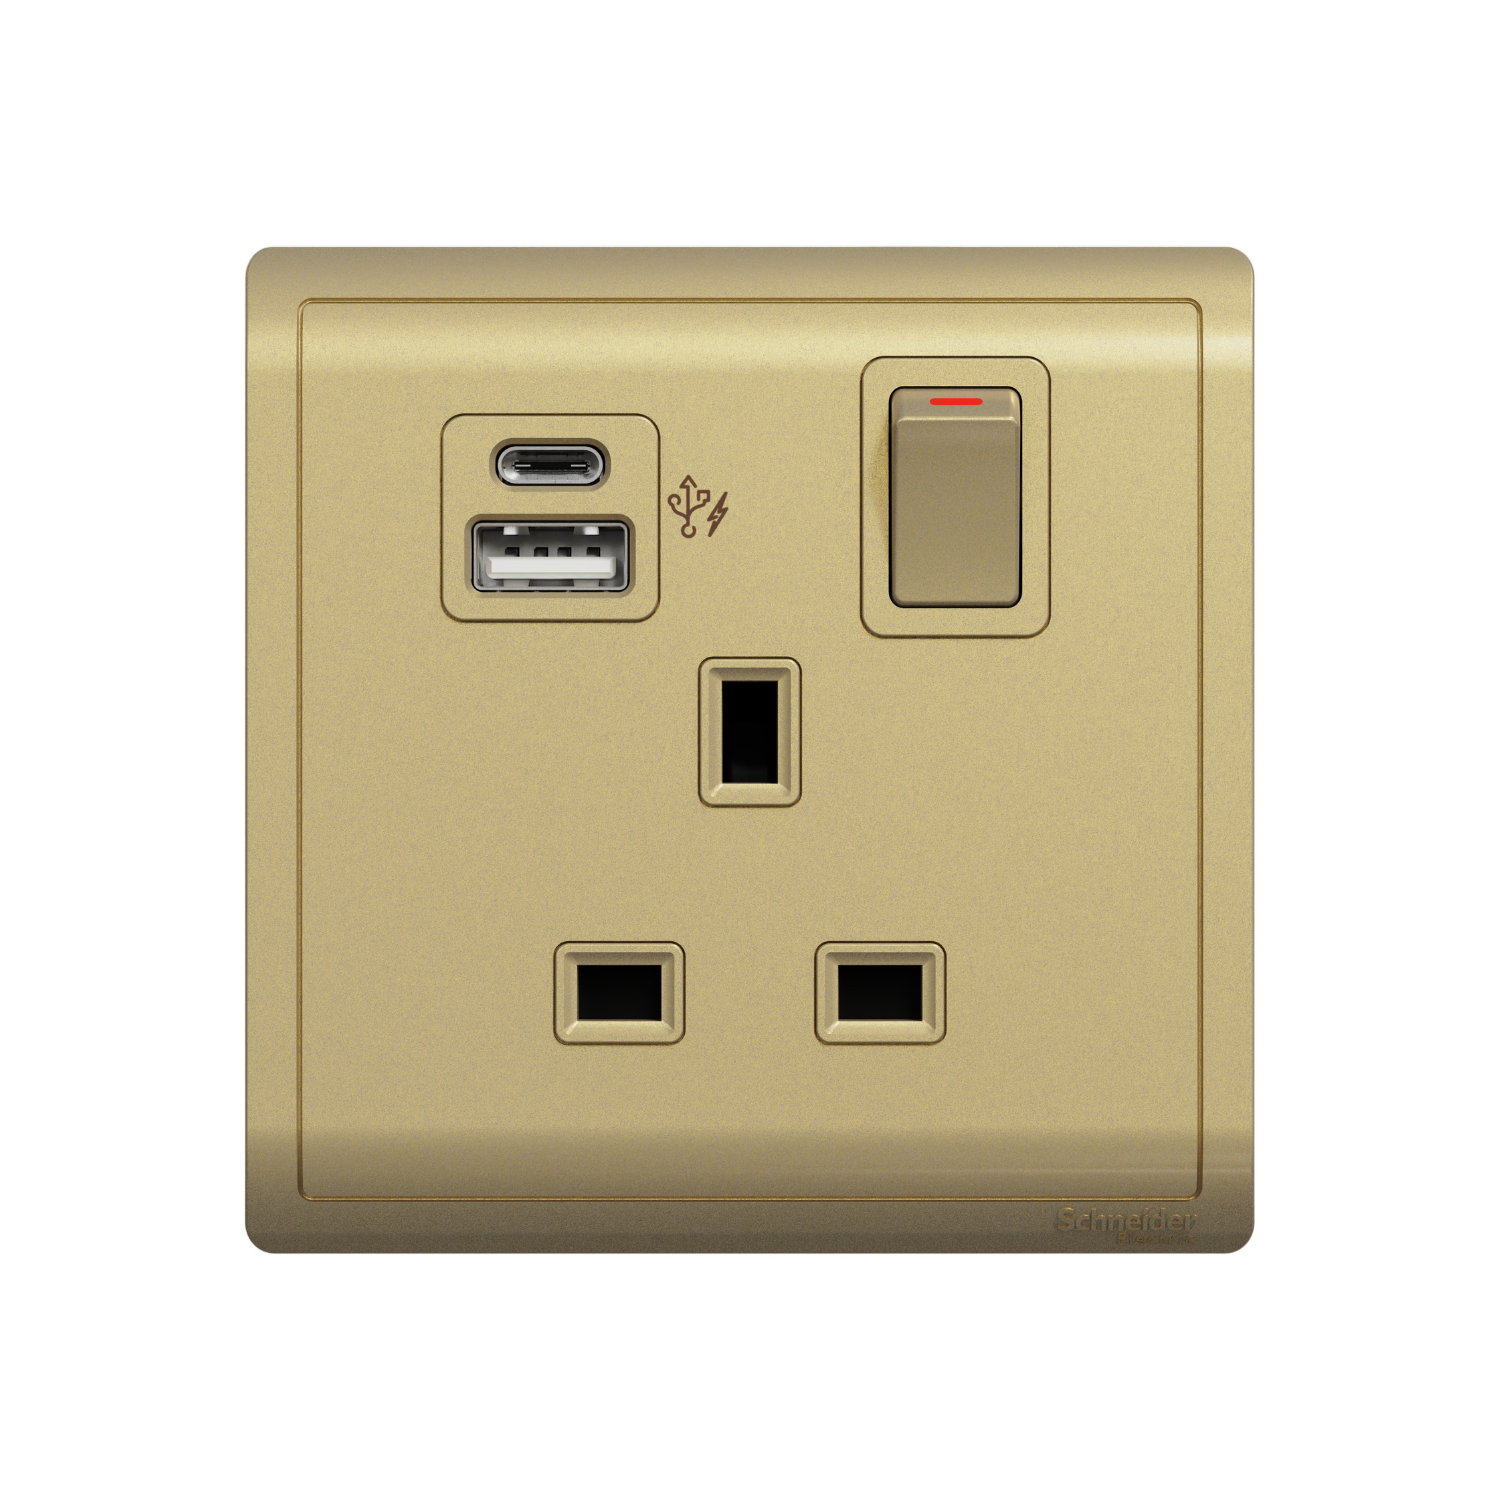 PIENO 13A 1 Gang Double Pole Switched Socket with 2 Gang USB Fast Charger Socket Type A+C, Wine Gold